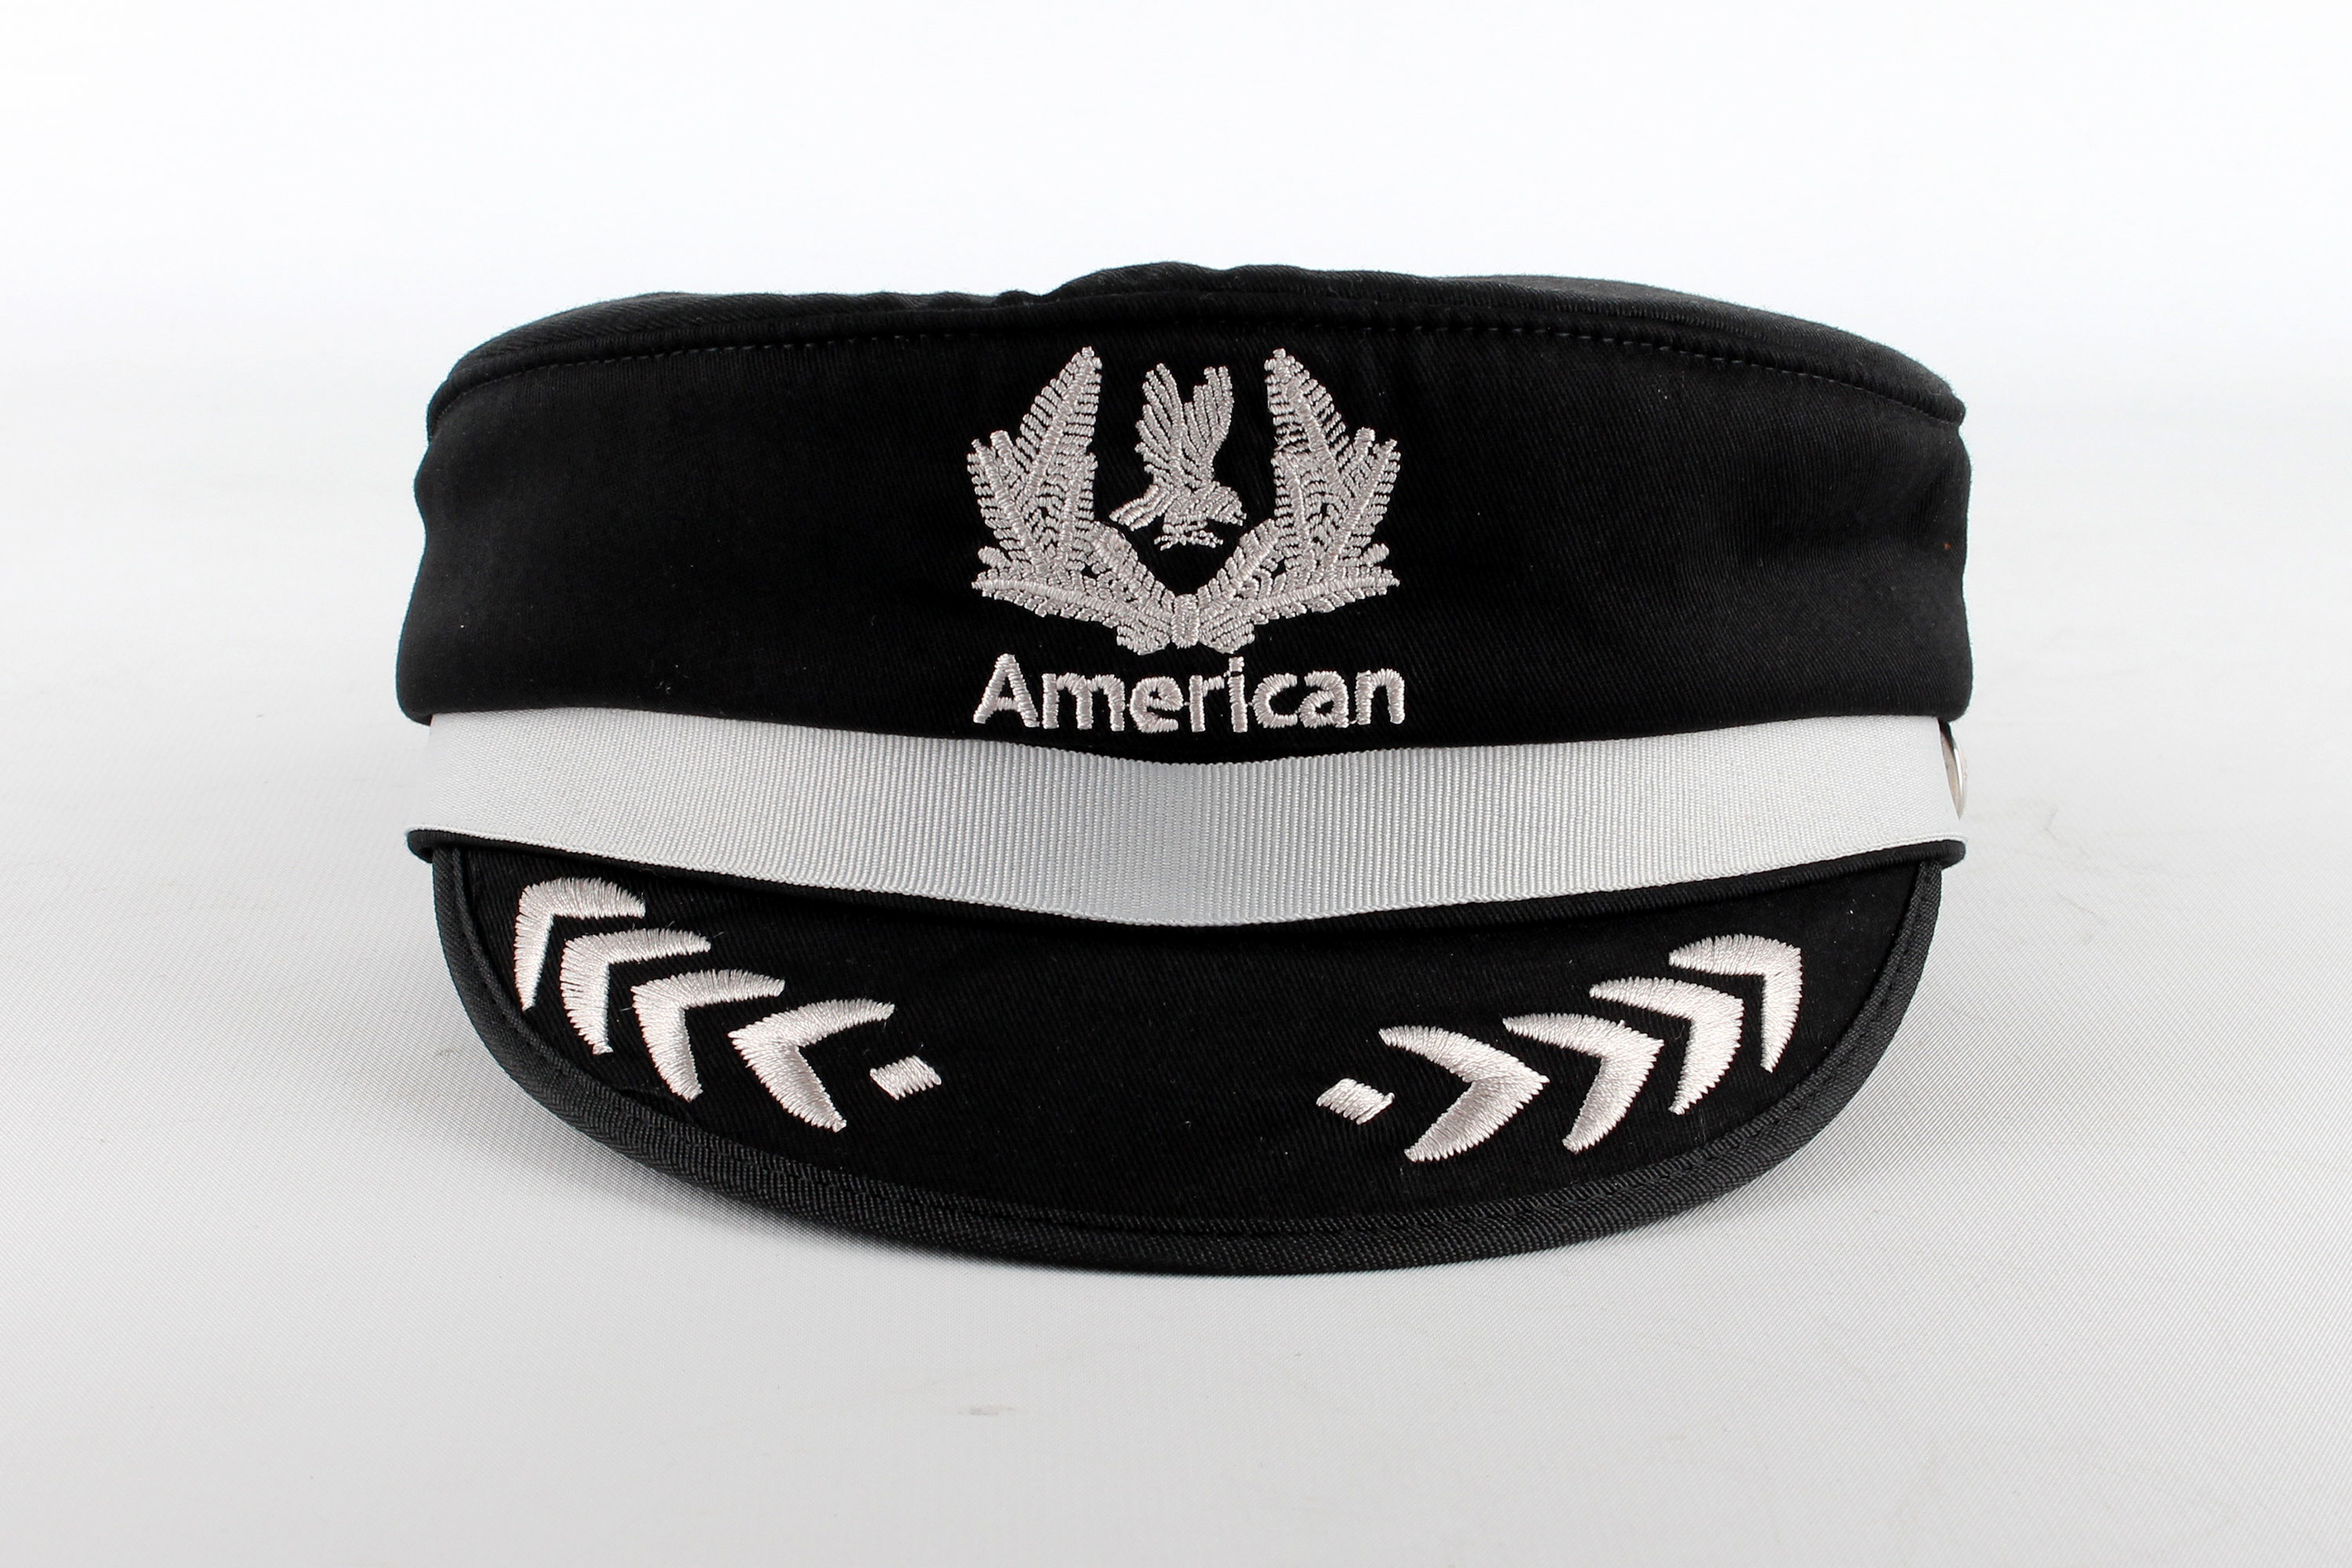 HT002-1 - "american Airlines Children's Pilot Hat New Livery"